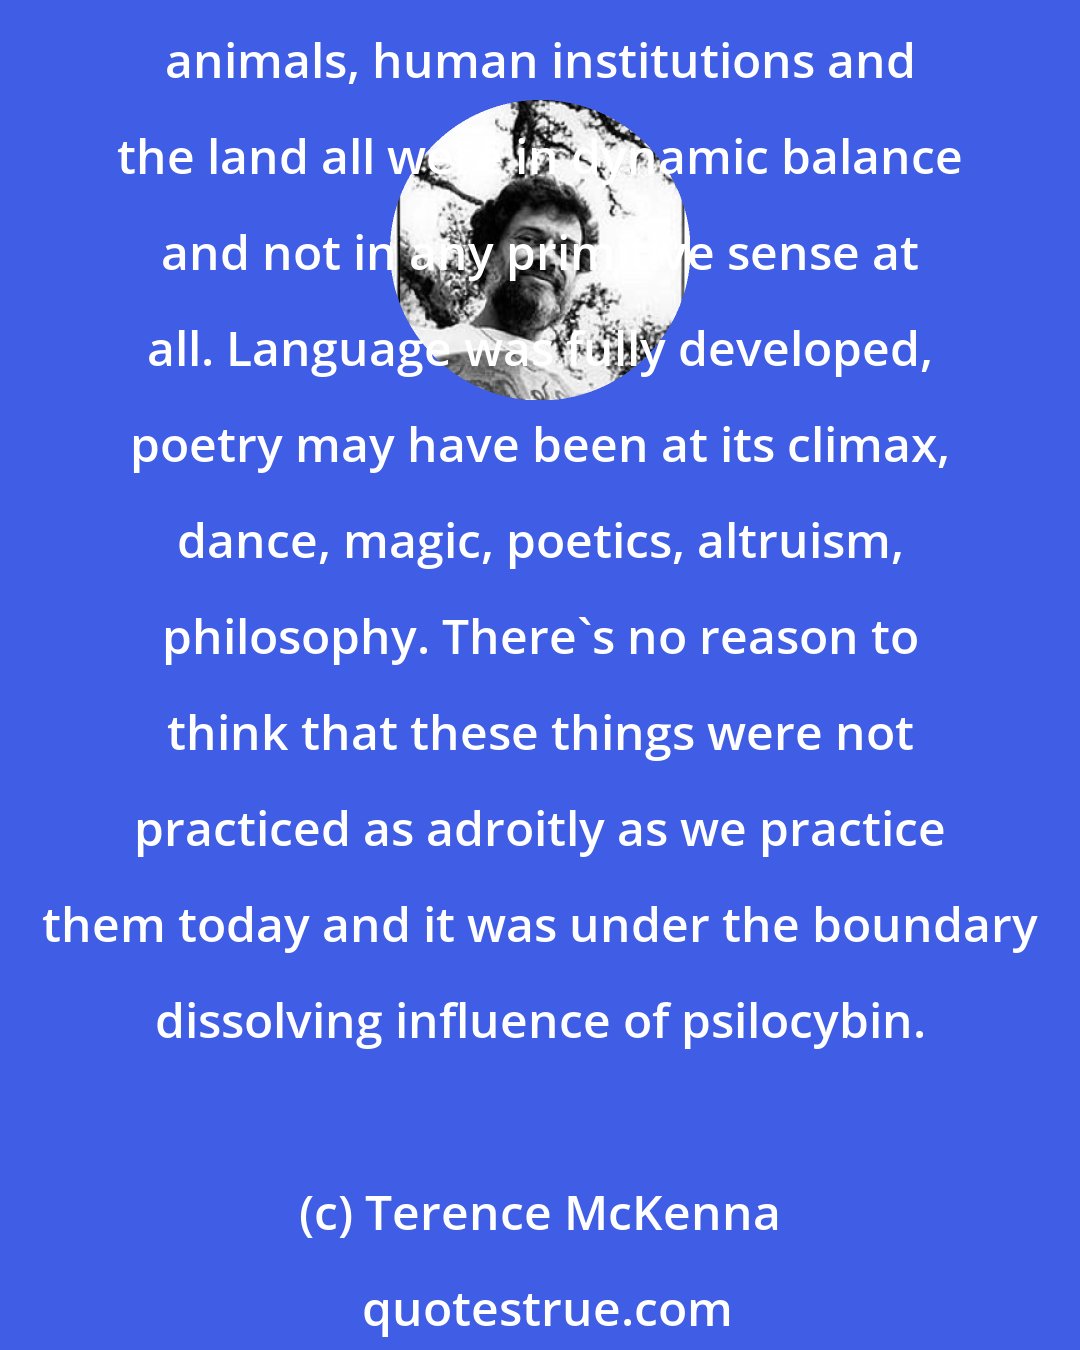 Terence McKenna: Sometime in the last 50,000 years, before 12,000 years ago, a kind of paradise came into existence. A situation in which men and women, parents and children, people and animals, human institutions and the land all were in dynamic balance and not in any primitive sense at all. Language was fully developed, poetry may have been at its climax, dance, magic, poetics, altruism, philosophy. There's no reason to think that these things were not practiced as adroitly as we practice them today and it was under the boundary dissolving influence of psilocybin.